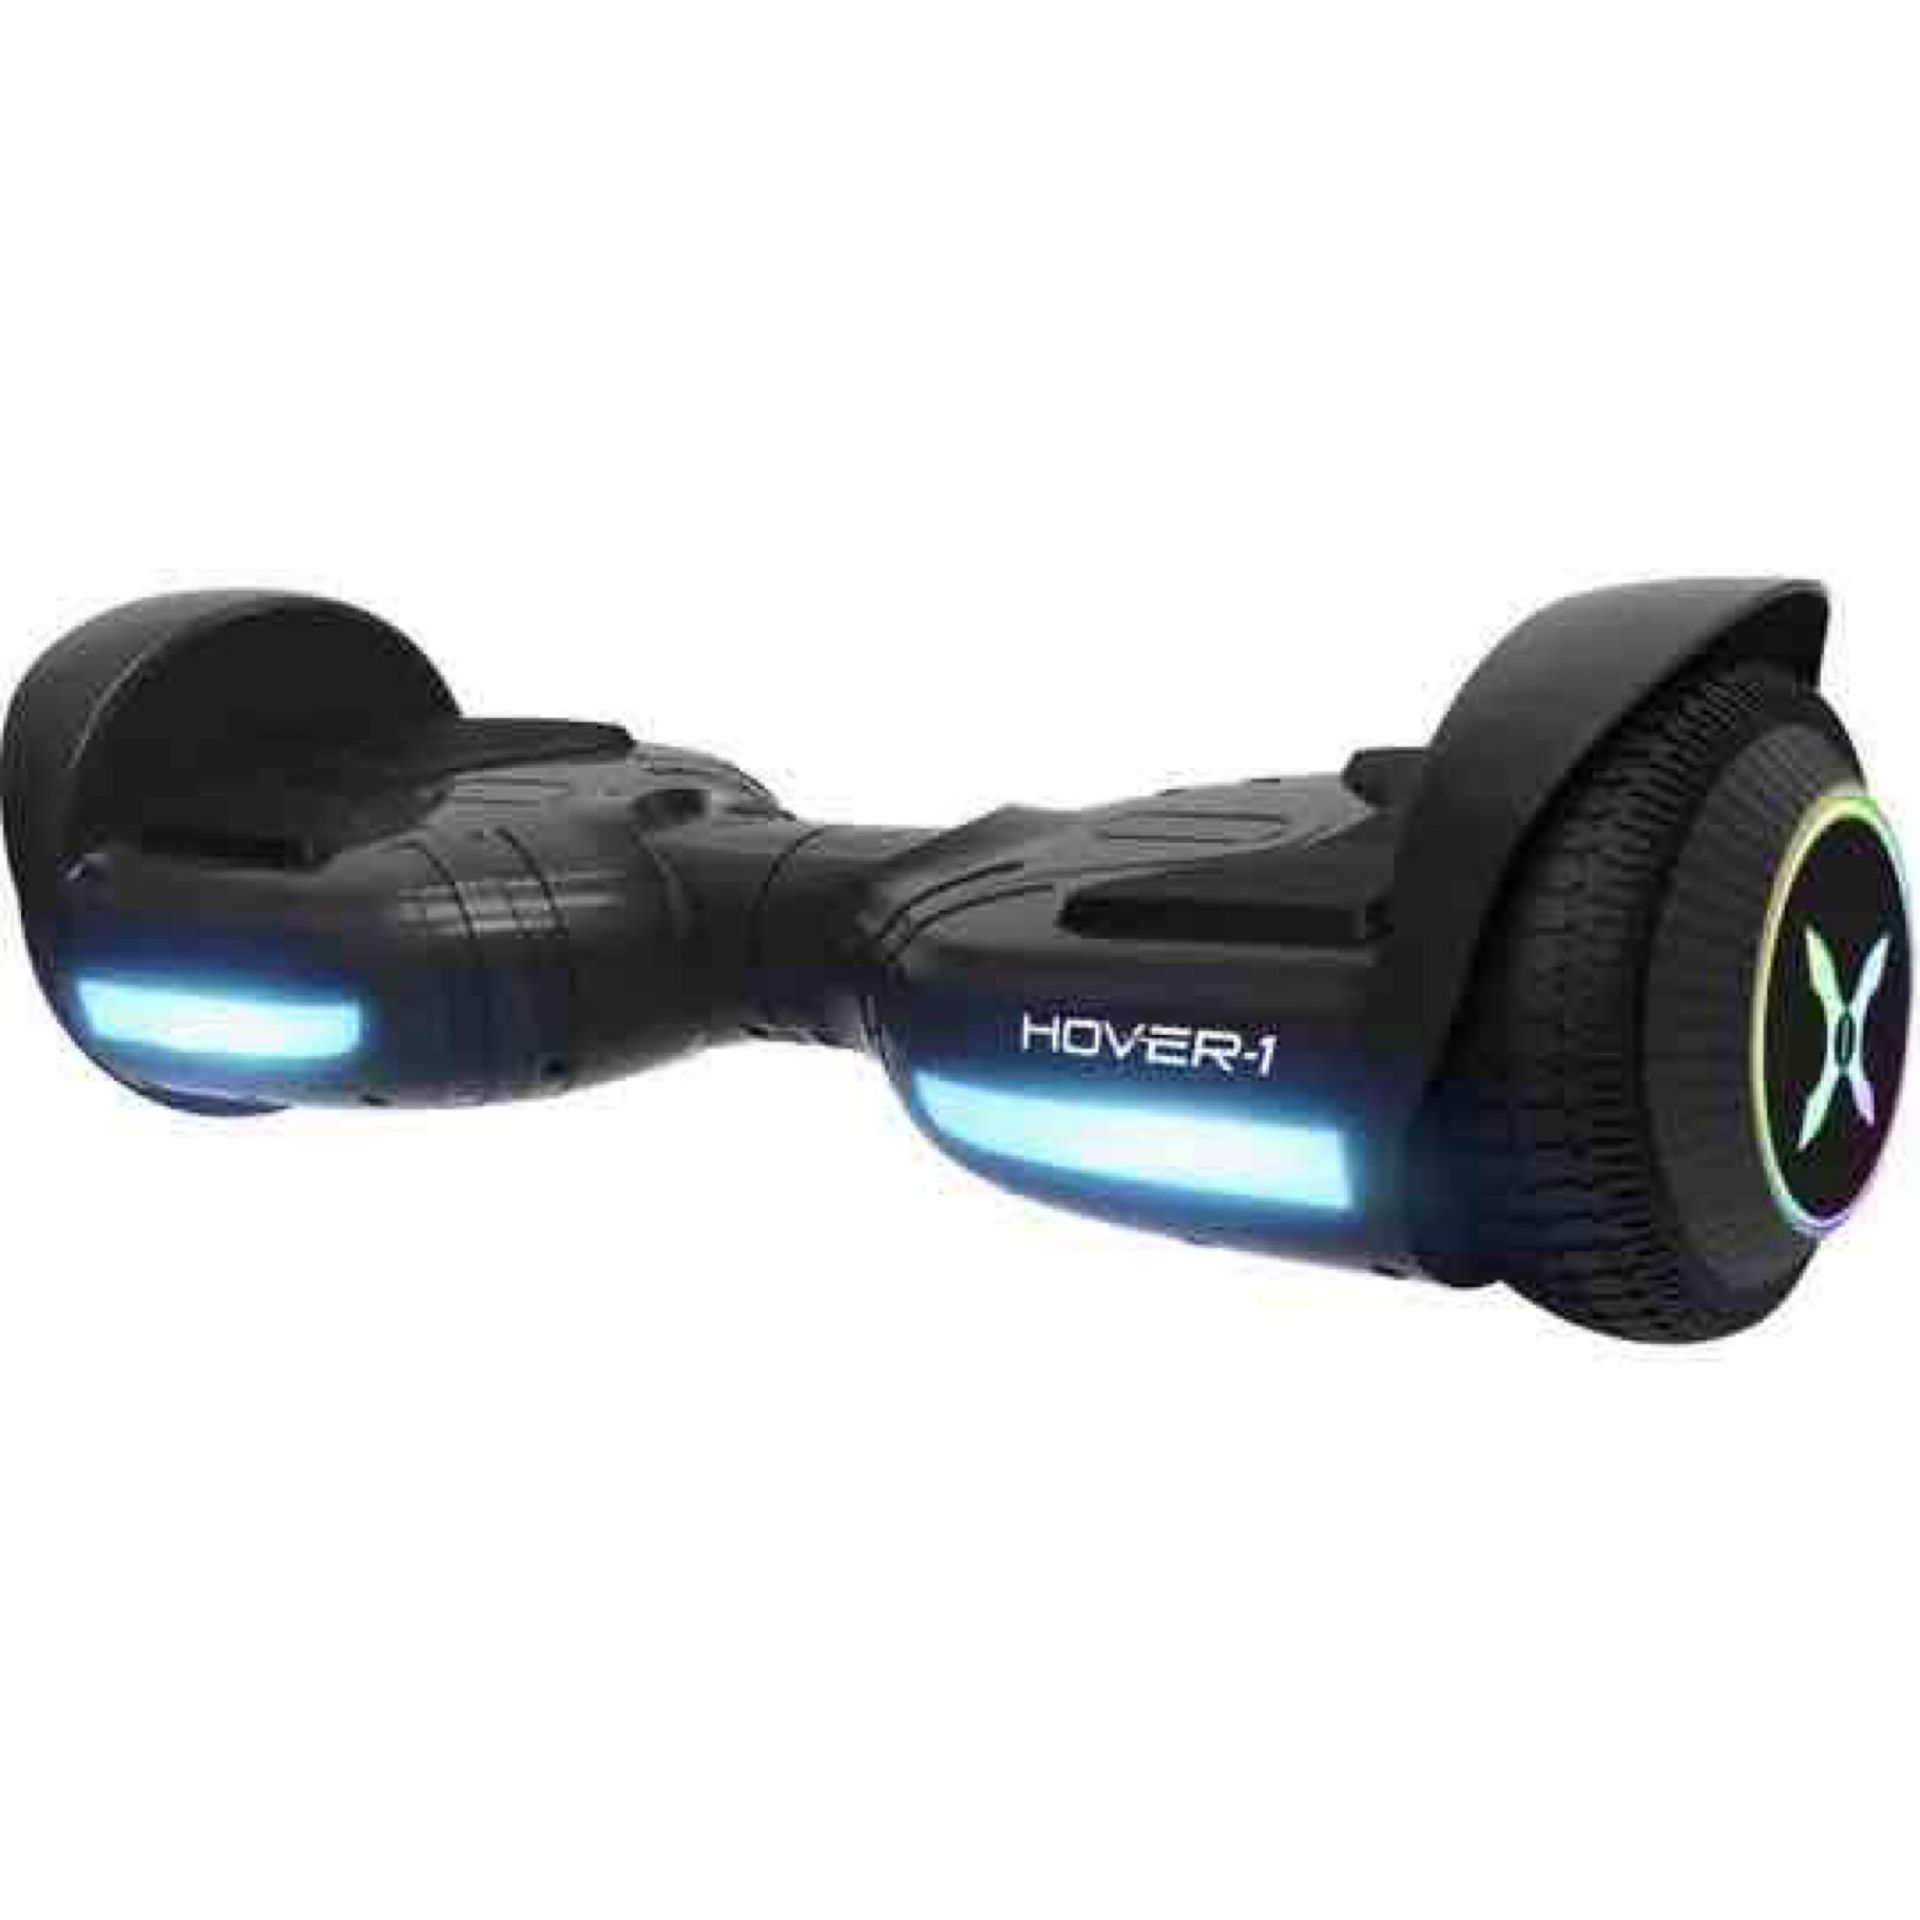 Boxed Hover-1 Hoverboard Electrical RRP £149.99